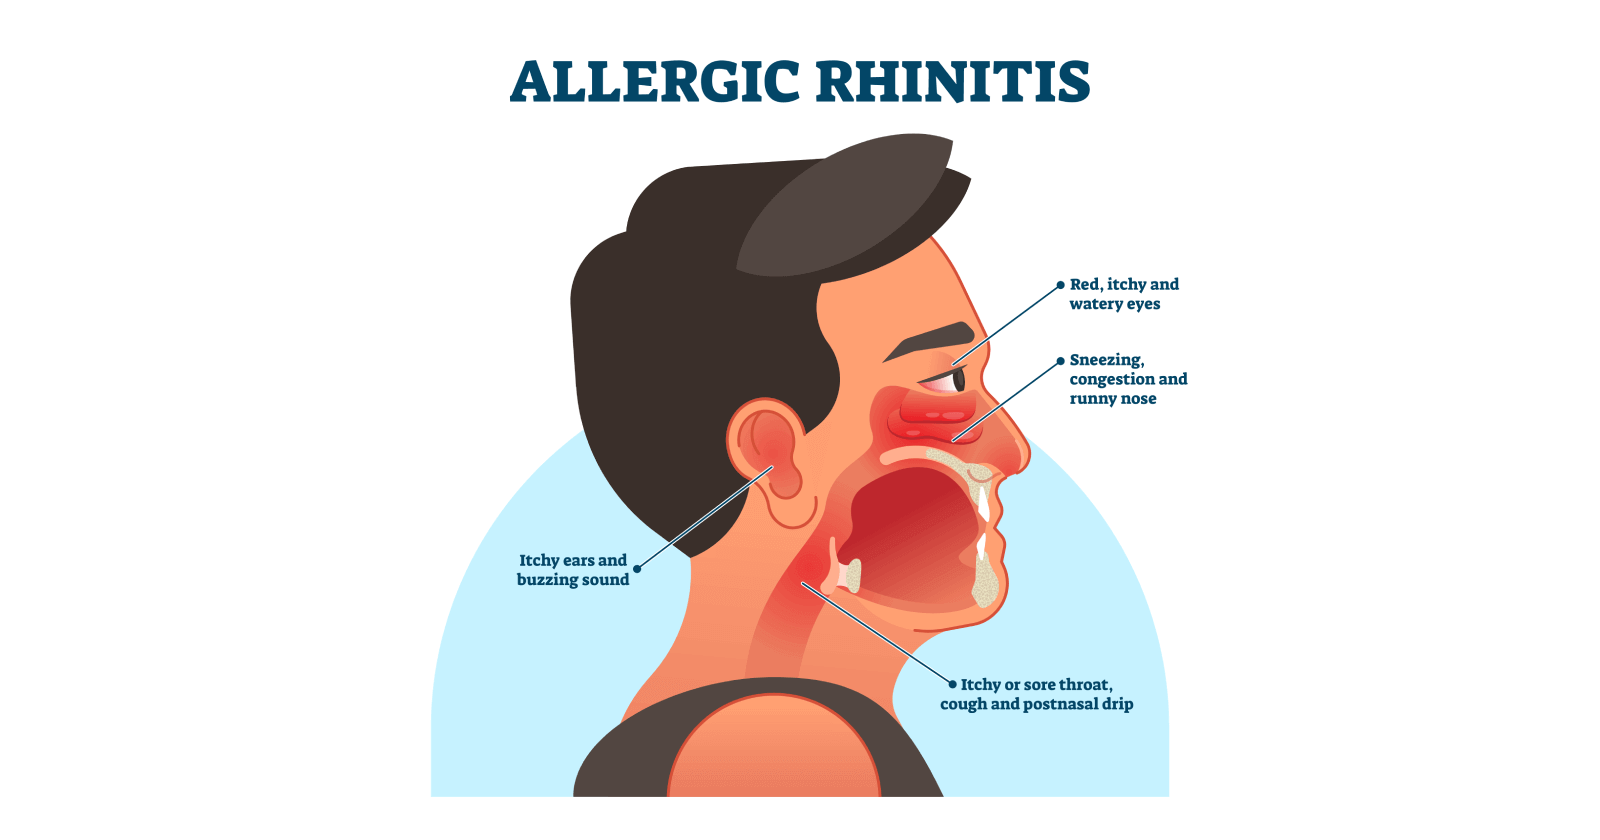 Overview of Allergic Rhinitis: Causes, symptoms, types, stages and treatment